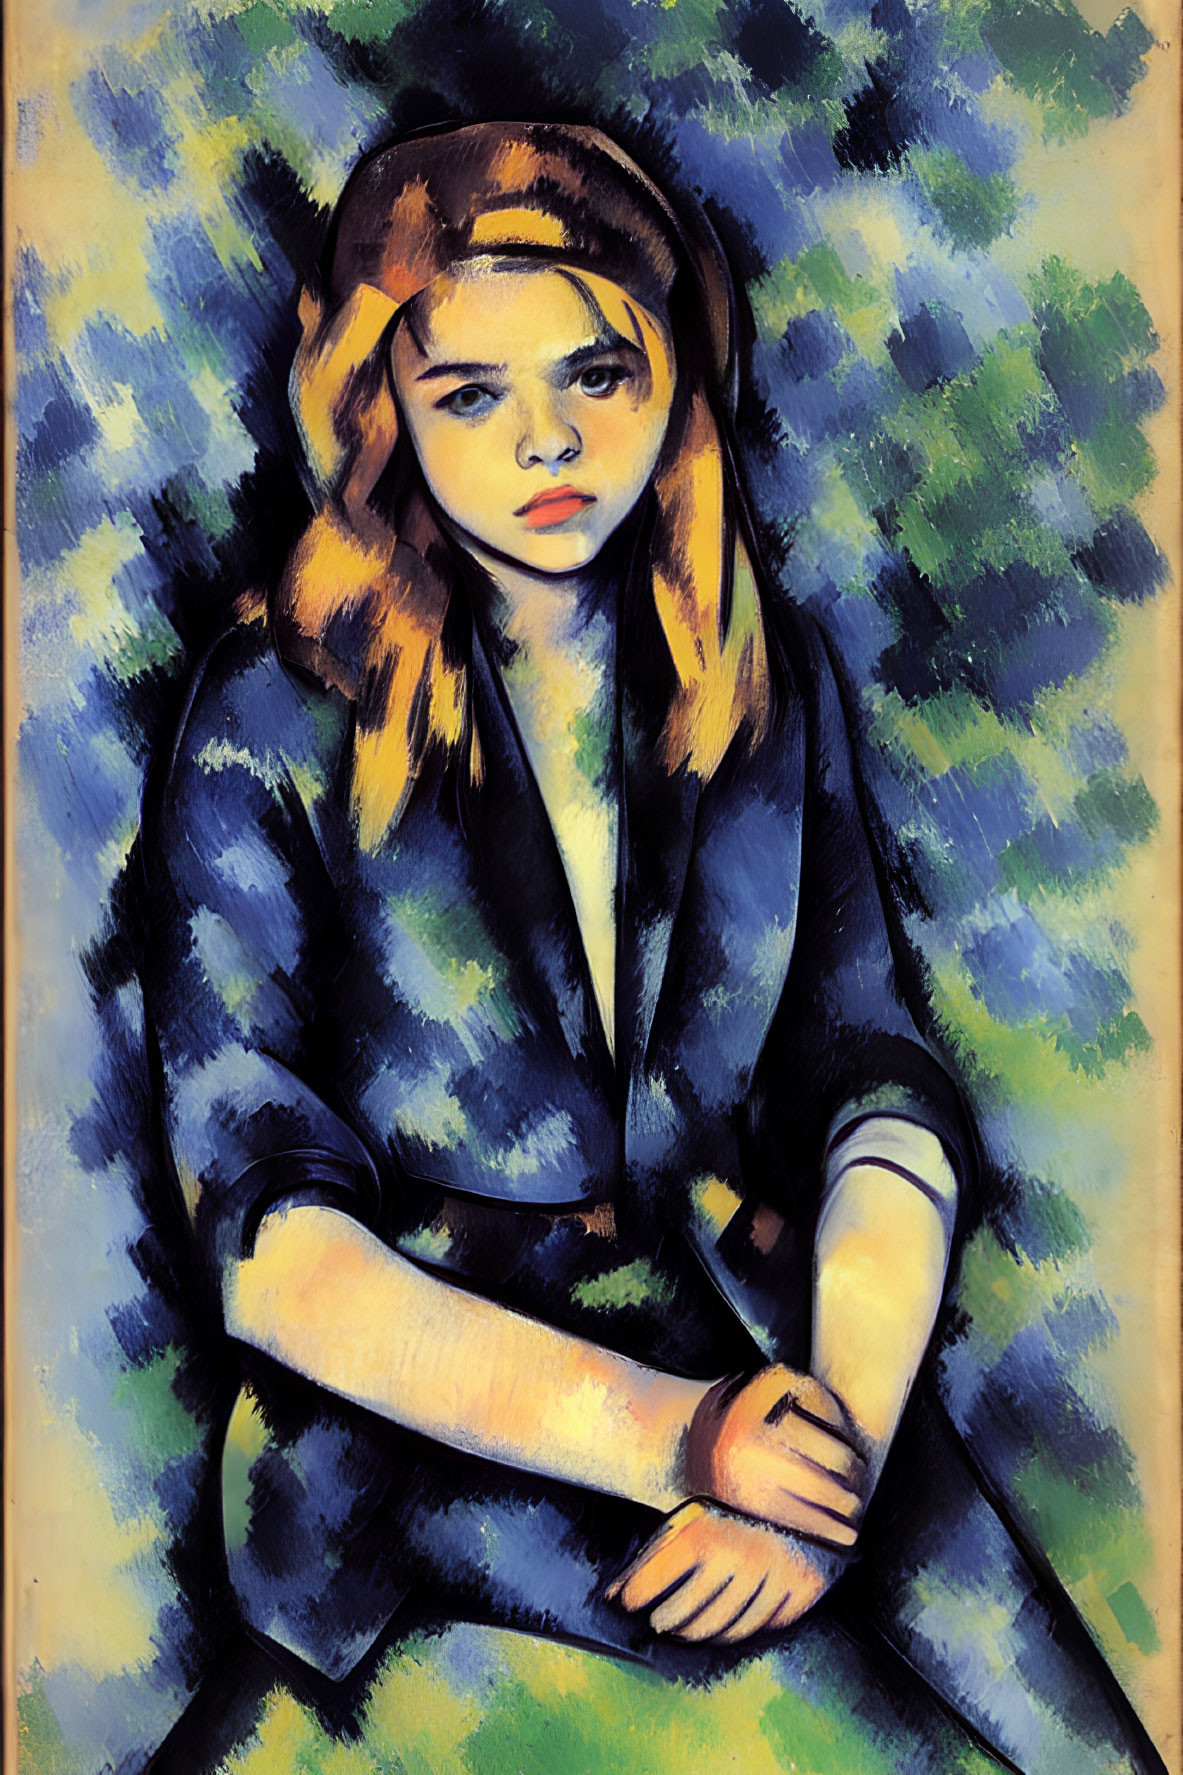 Seated person in blue outfit with headband in Expressionist painting